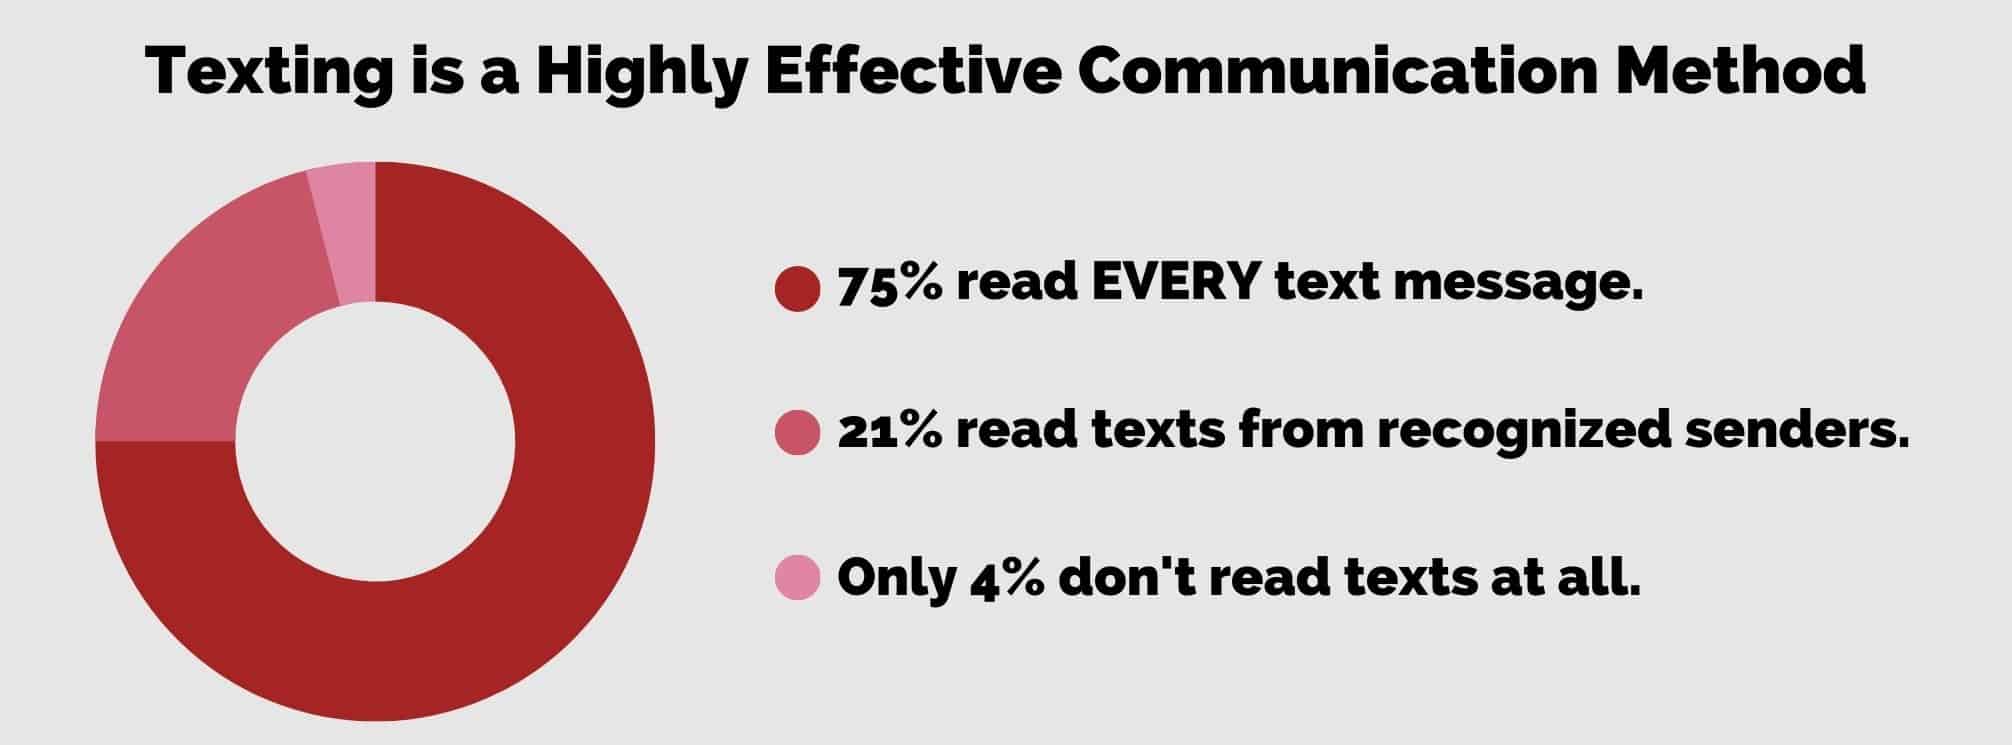 texting is a highly effective communication method with stats supporting how many people read texts vs dont.